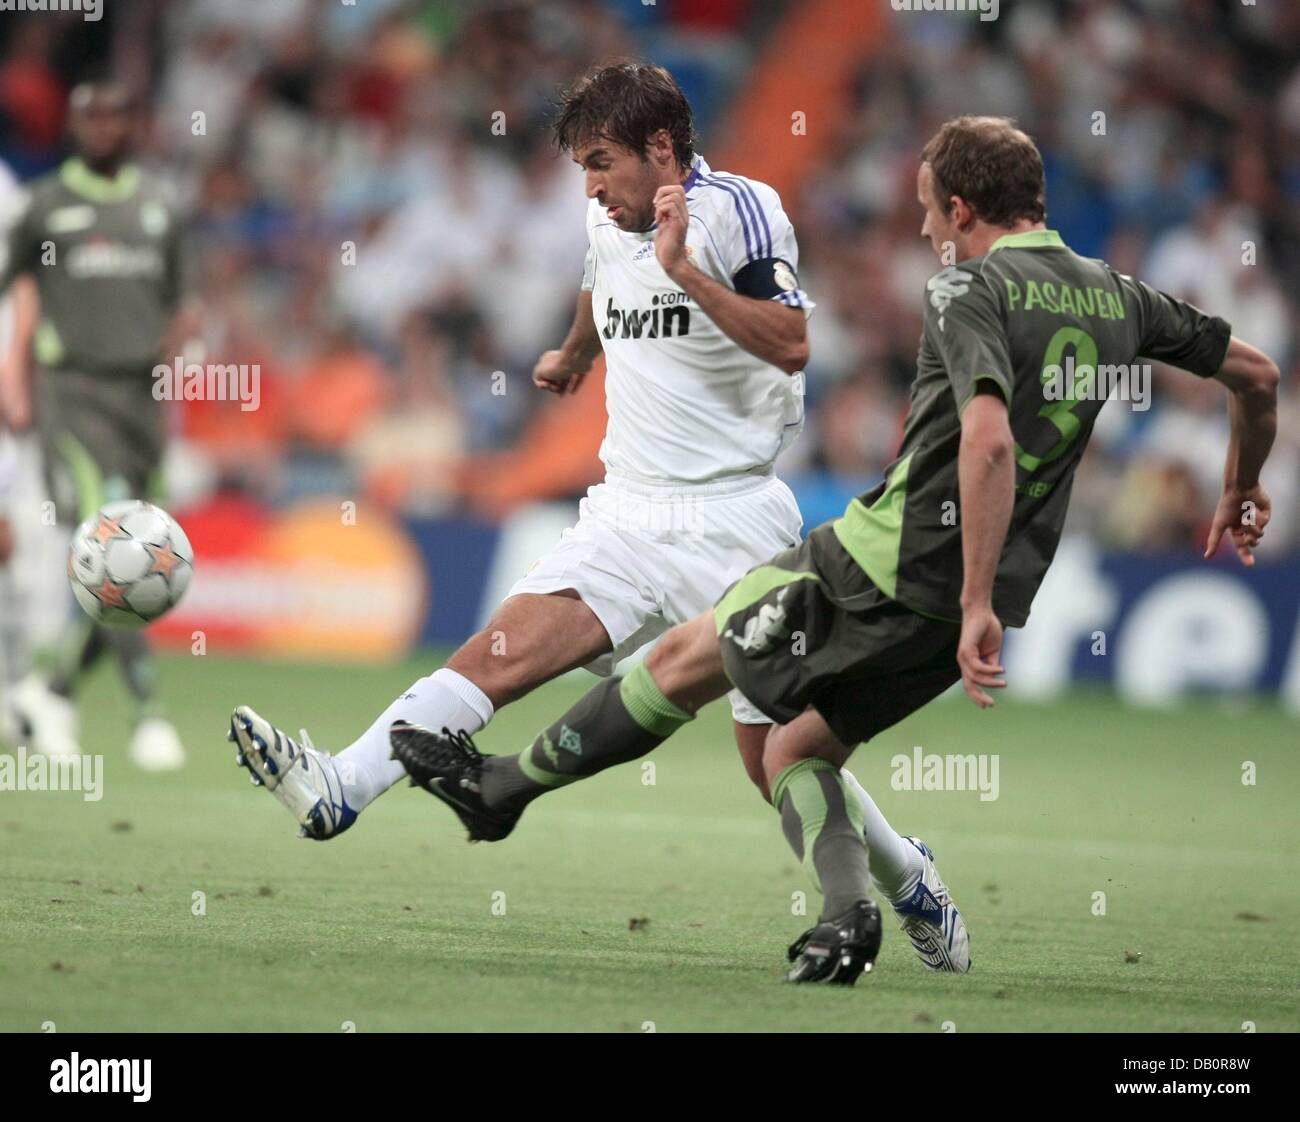 Real Madrid's captain Raul Gonzalez (L) vies for the ball with Werder Bremen's Finnish defender Petri Pasanen (R) during the Champions League group C soccer match Real Madrid vs. Werder Bremen at the Santiago Bernabeu stadium in Madrid, Spain, 18 September 2007. Photo: MONDELO Stock Photo